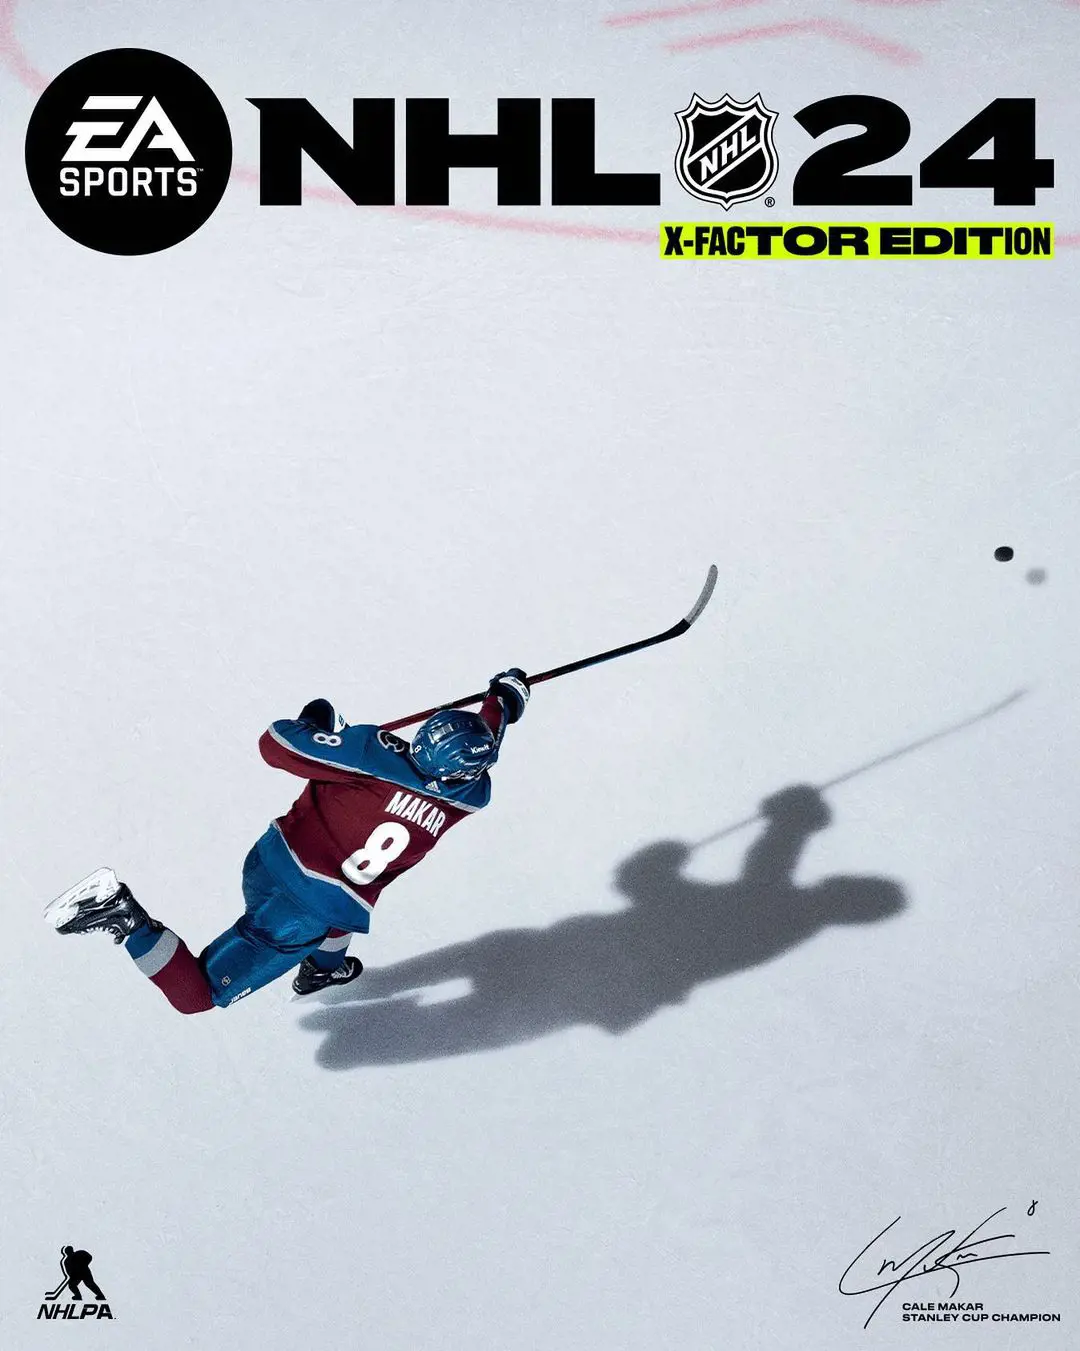 The X-Factor Edition with Cale Makar on the covers